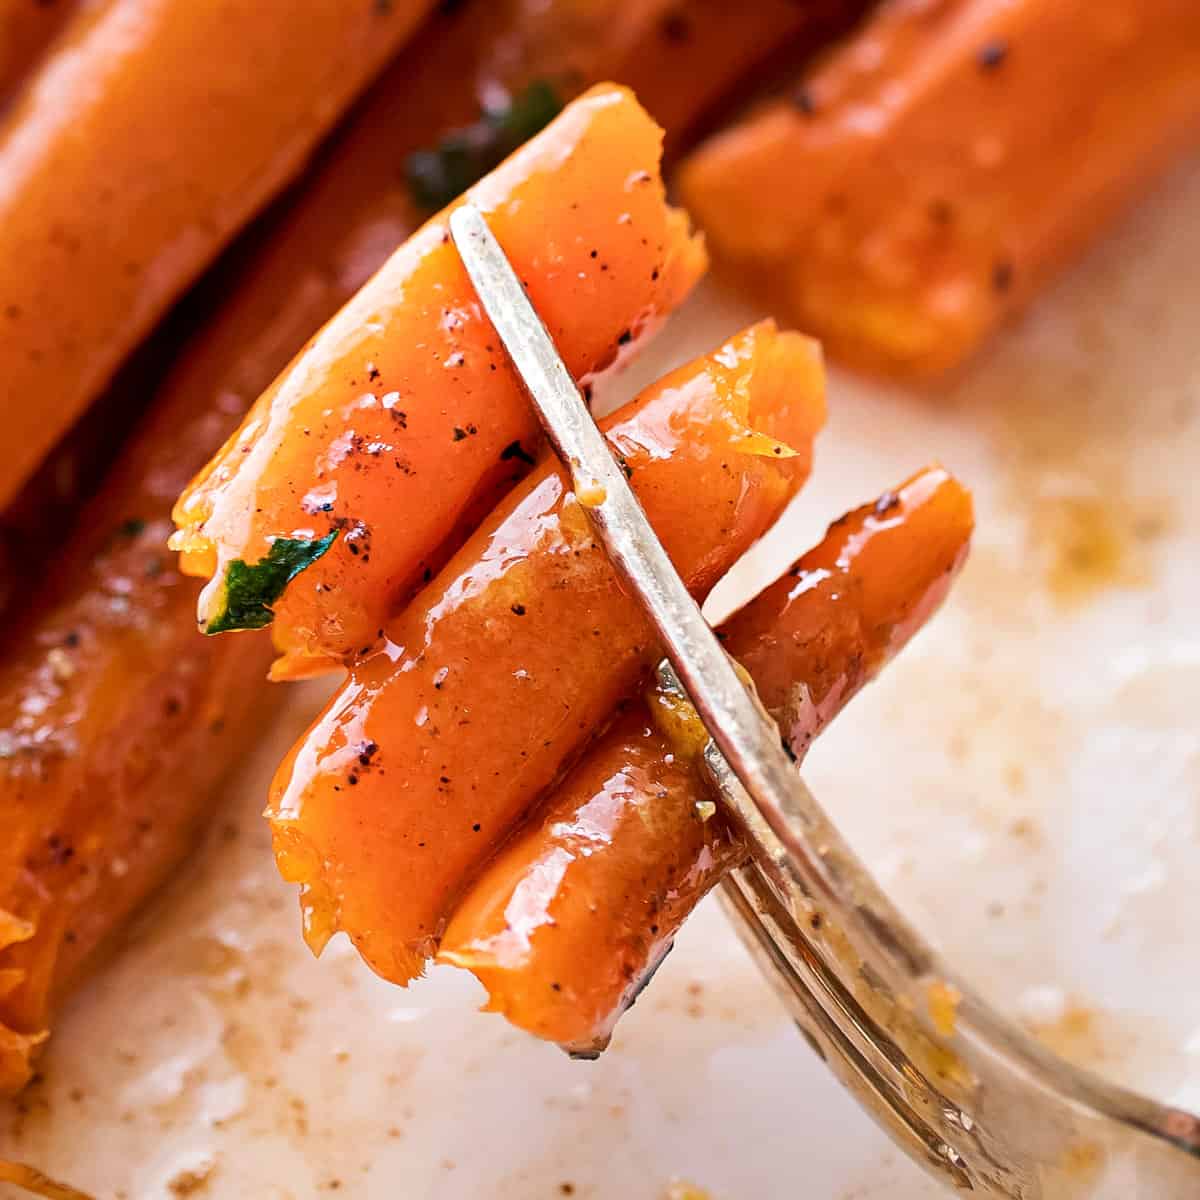 https://www.thechunkychef.com/wp-content/uploads/2018/03/Slow-Cooker-Glazed-Carrots-recipe-card.jpg